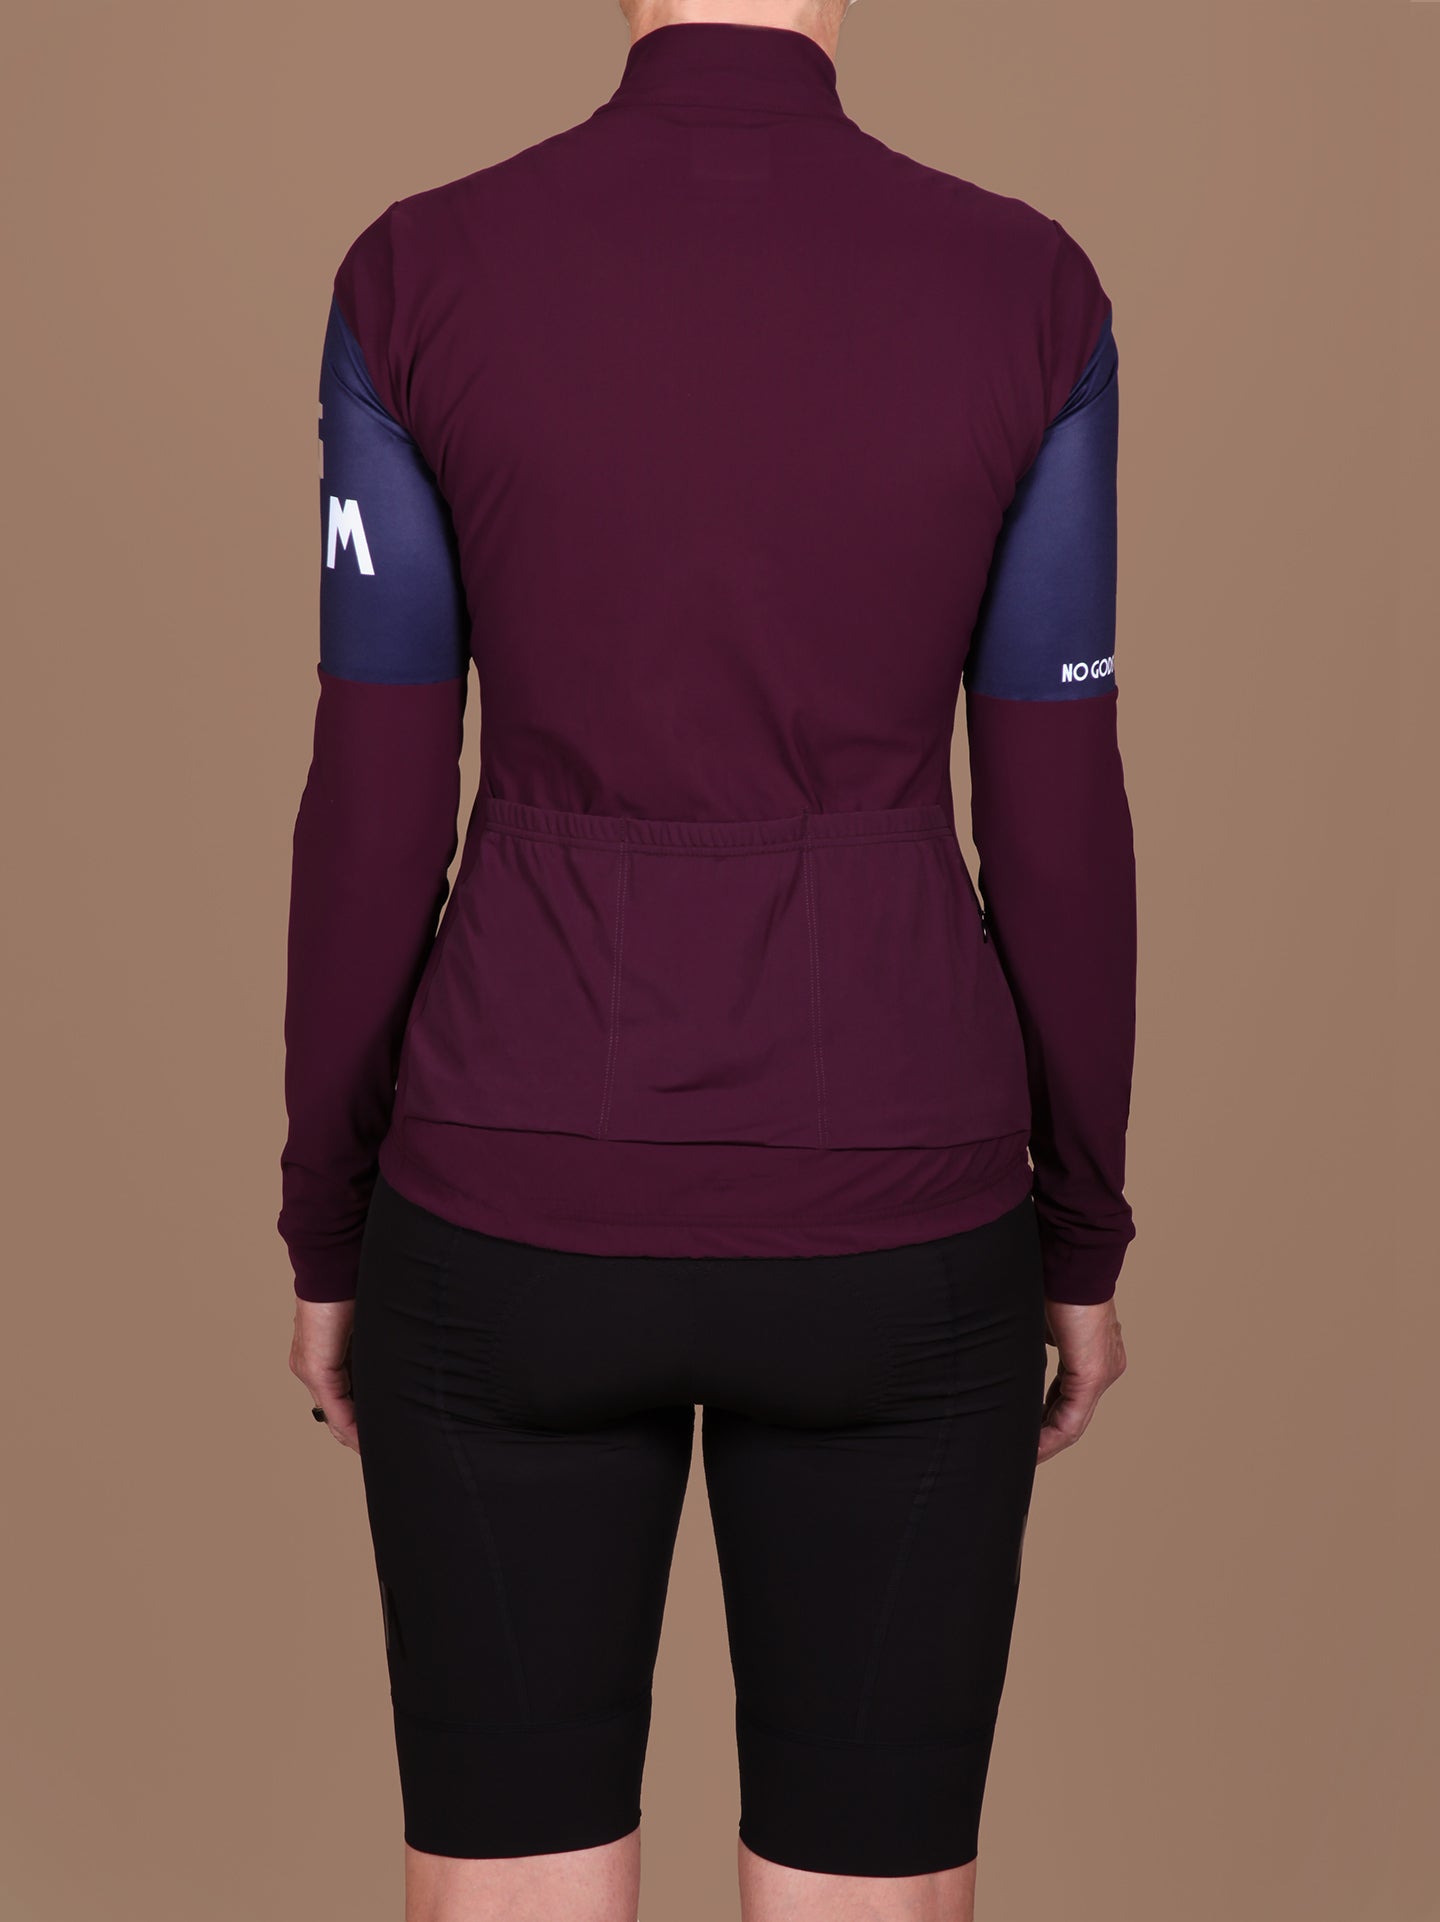 NGNM Performance Long Sleeve Jersey